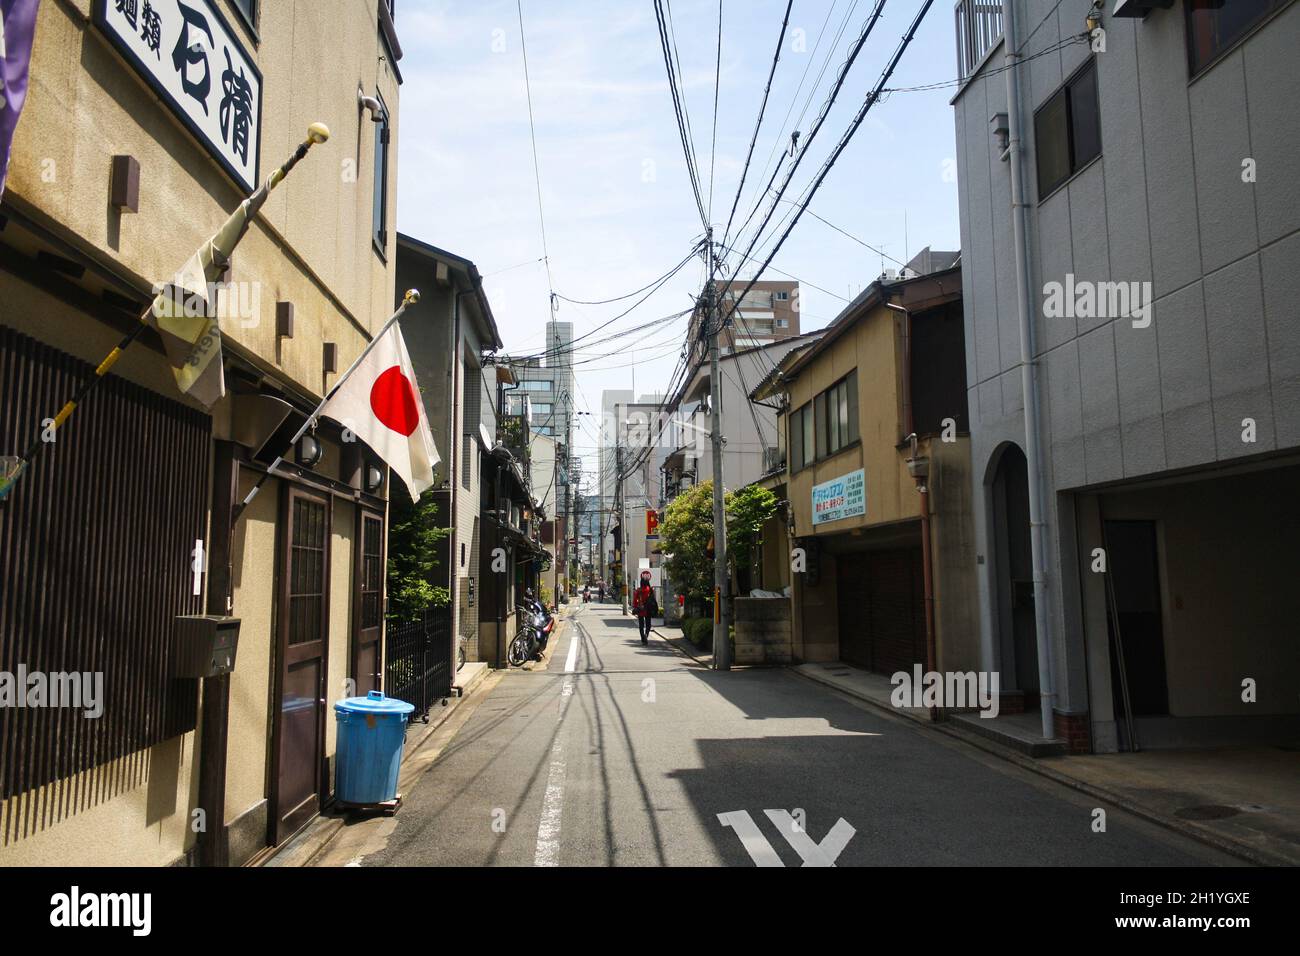 An alley in downtown Kyoto with small houses and electrical network cable. National flag of Japan or hinomaru on one of the house. Cloudy blue sky. Stock Photo